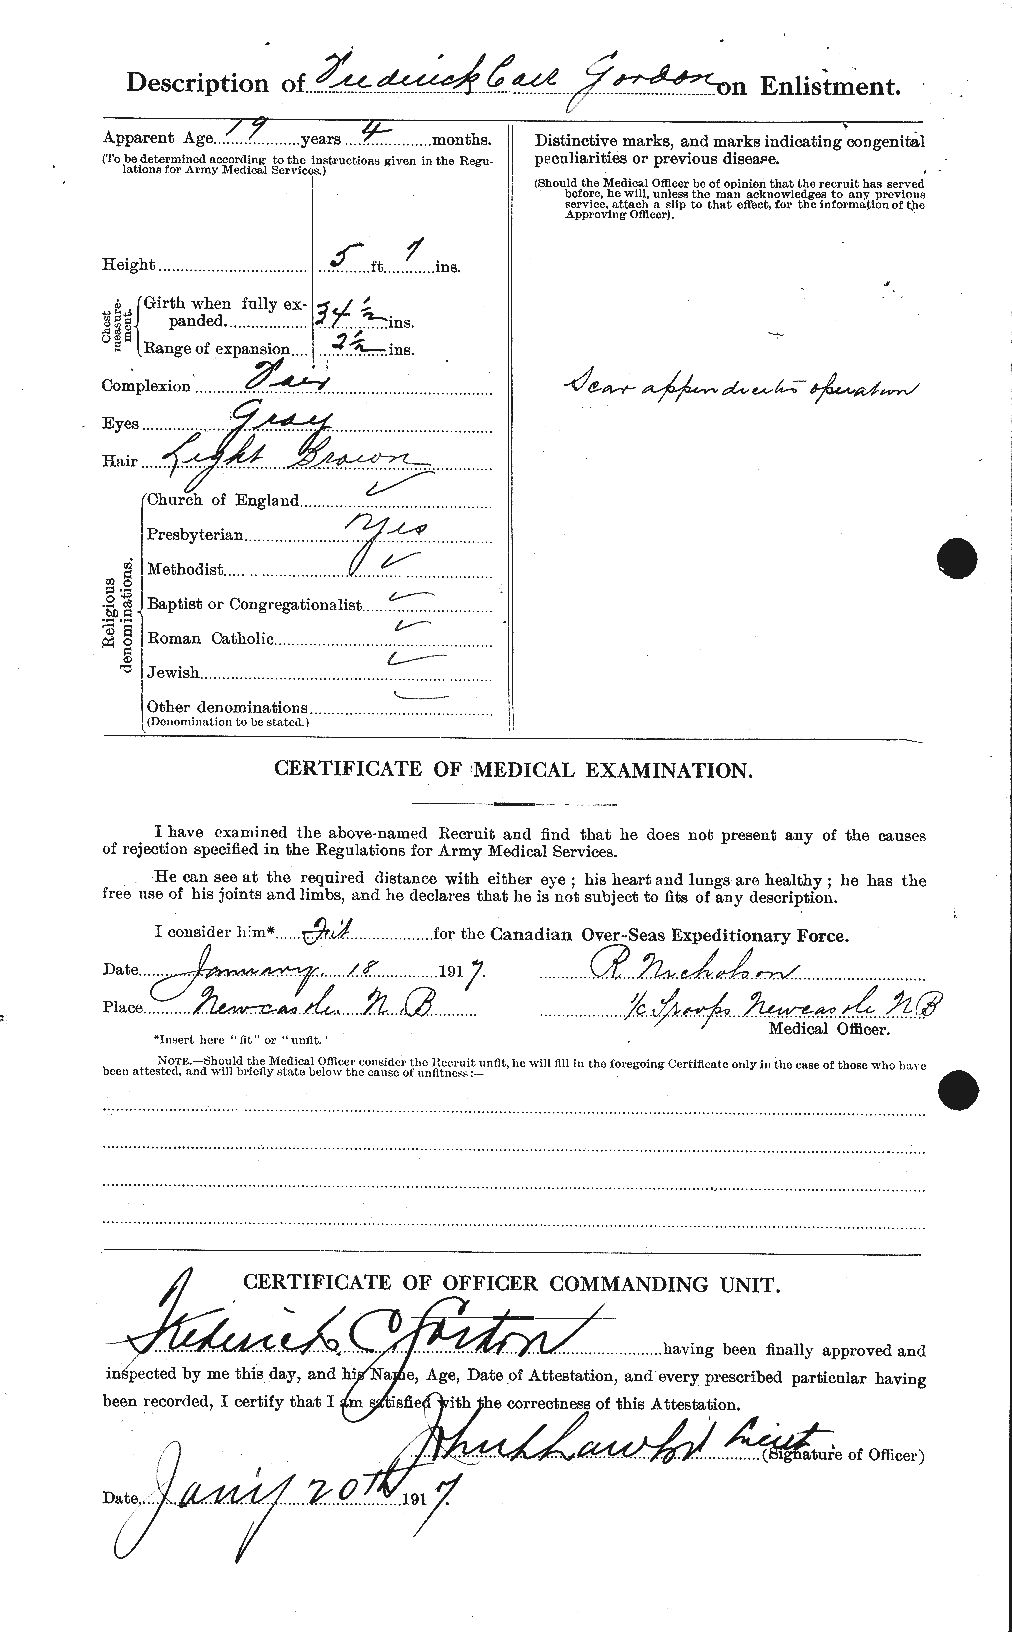 Personnel Records of the First World War - CEF 358381b